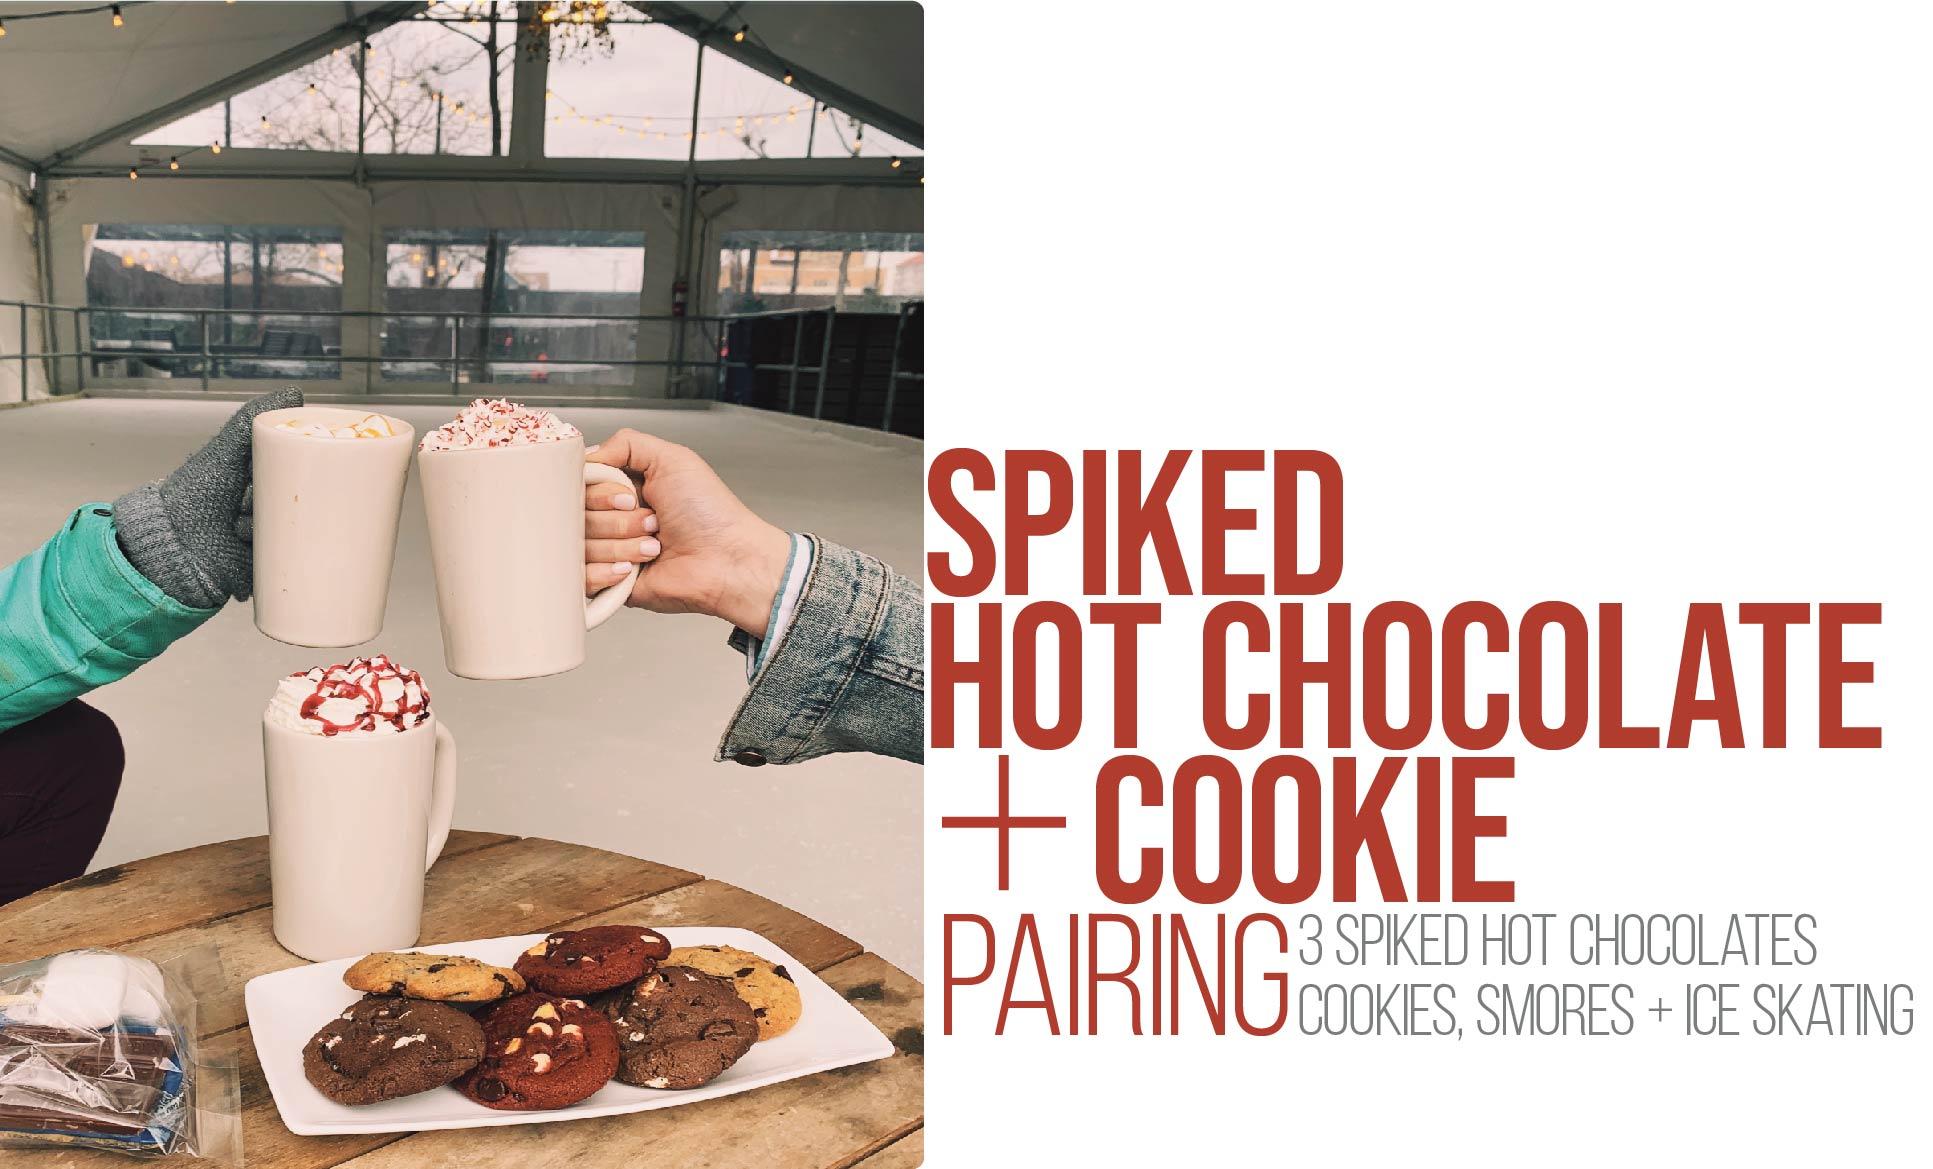 Spiked Hot Chocolate + Cookie Pairing